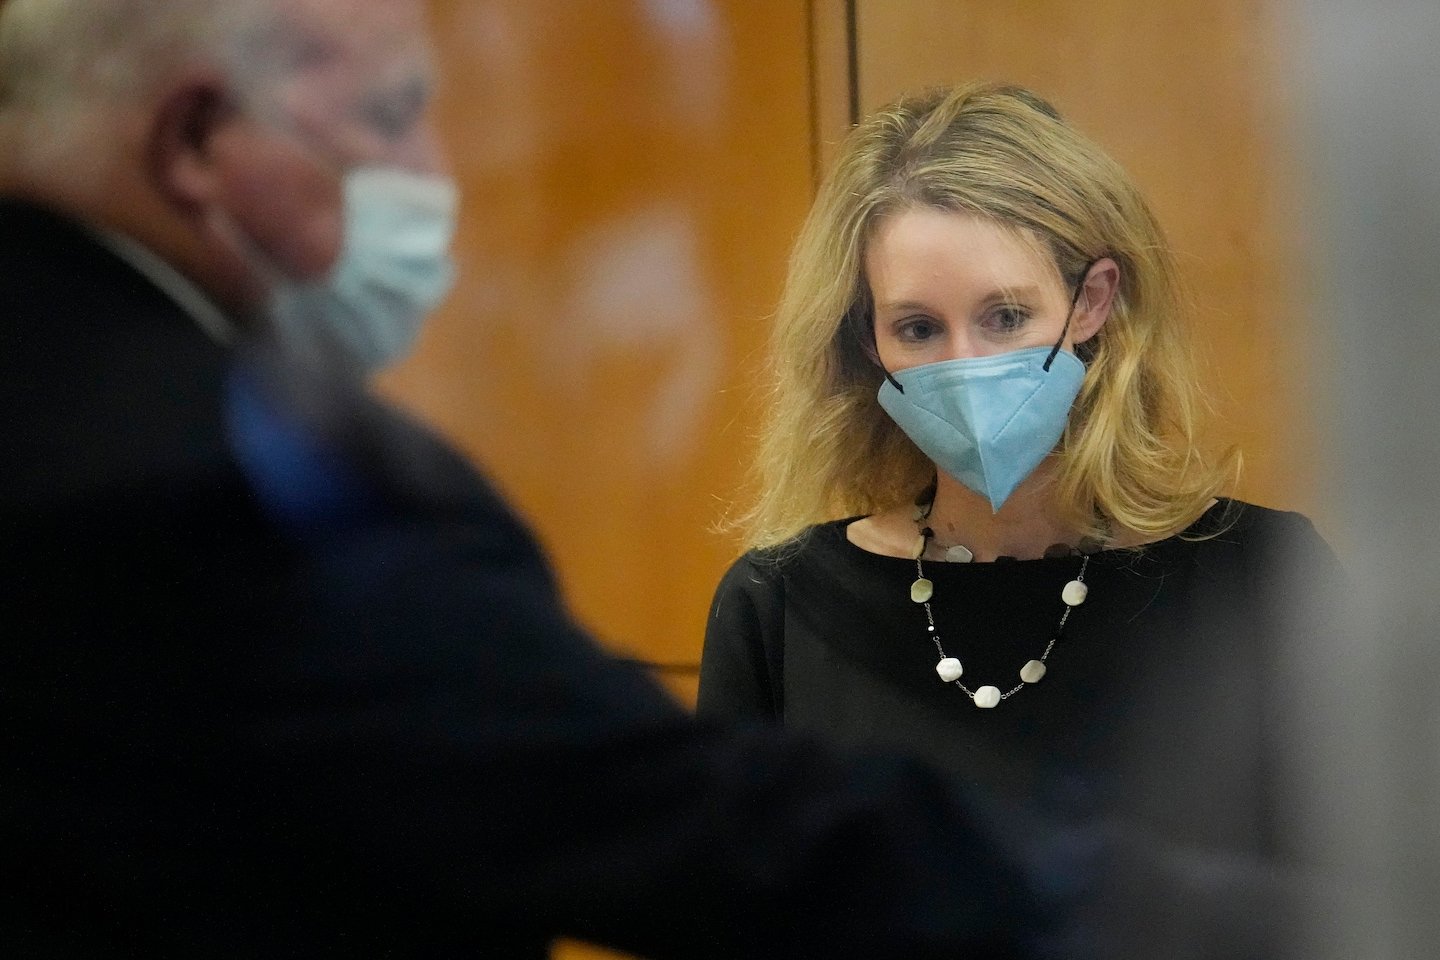 Jury asks court to hear recordings of Elizabeth Holmes speaking with investors on third full day of deliberations